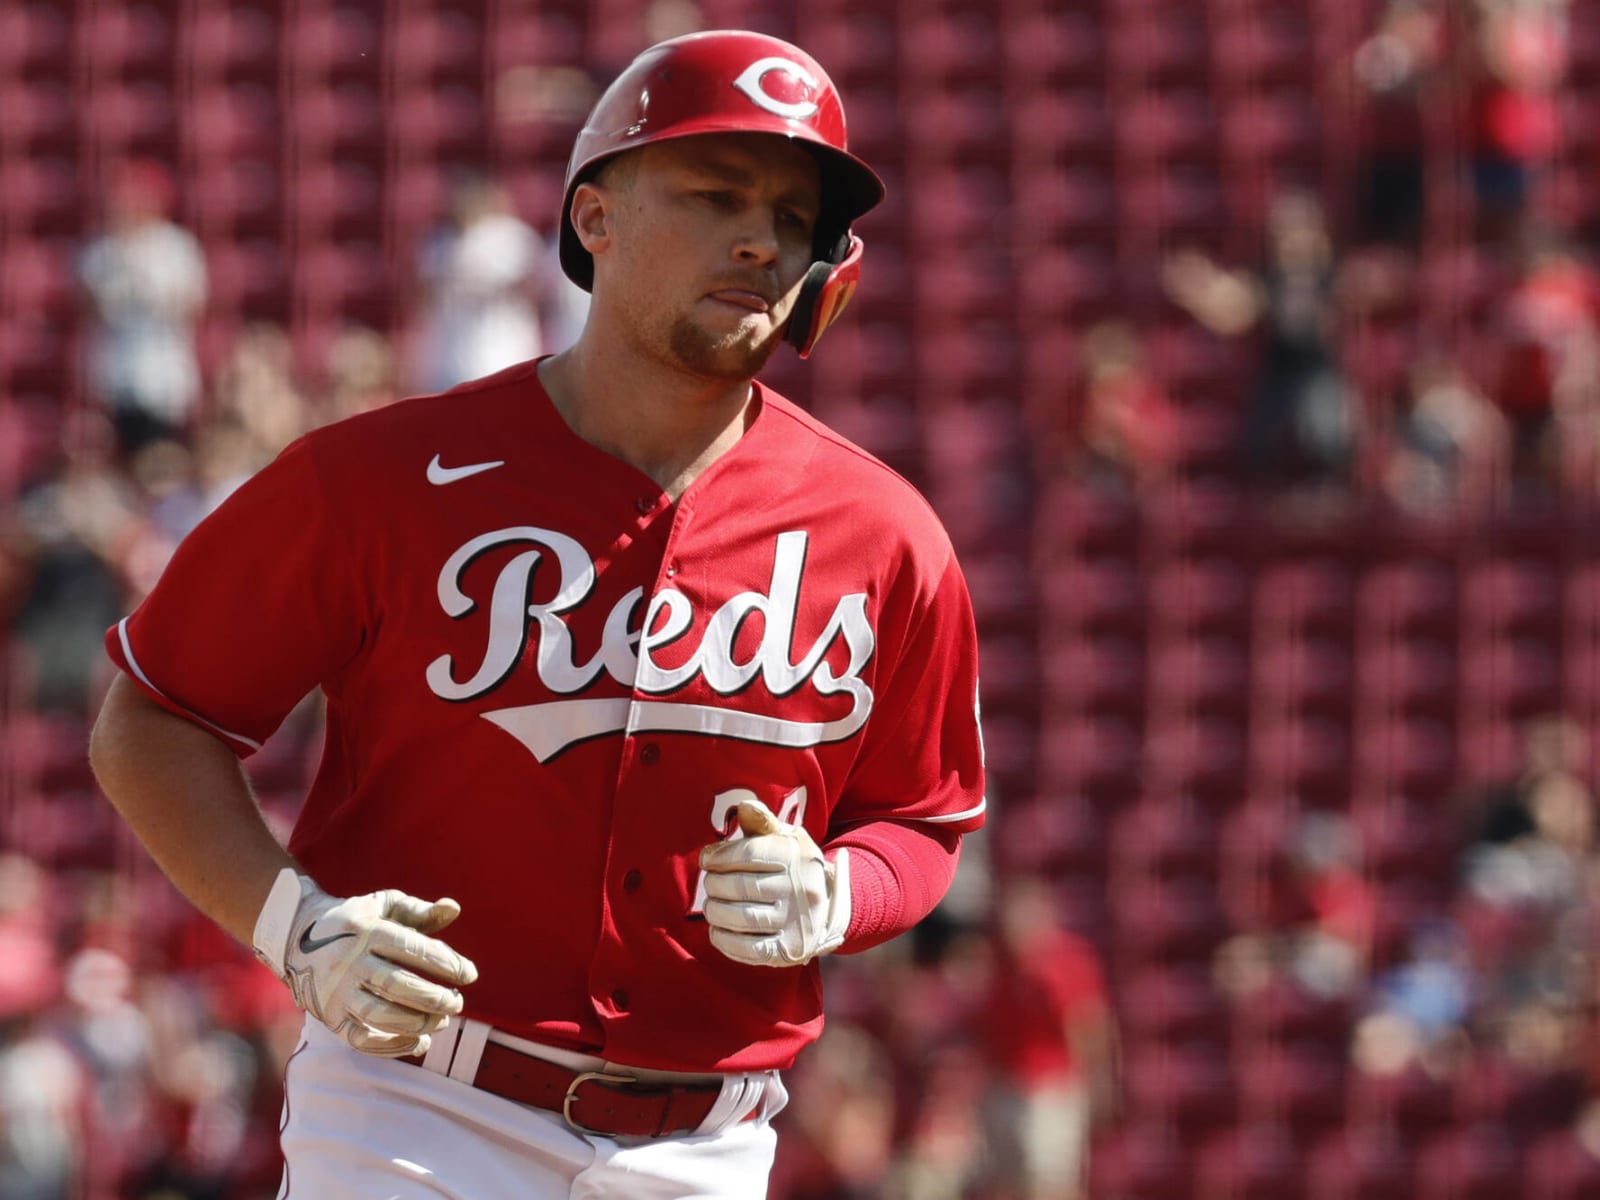 Reds: What might a contract extensionn for Brandon Drury look like?